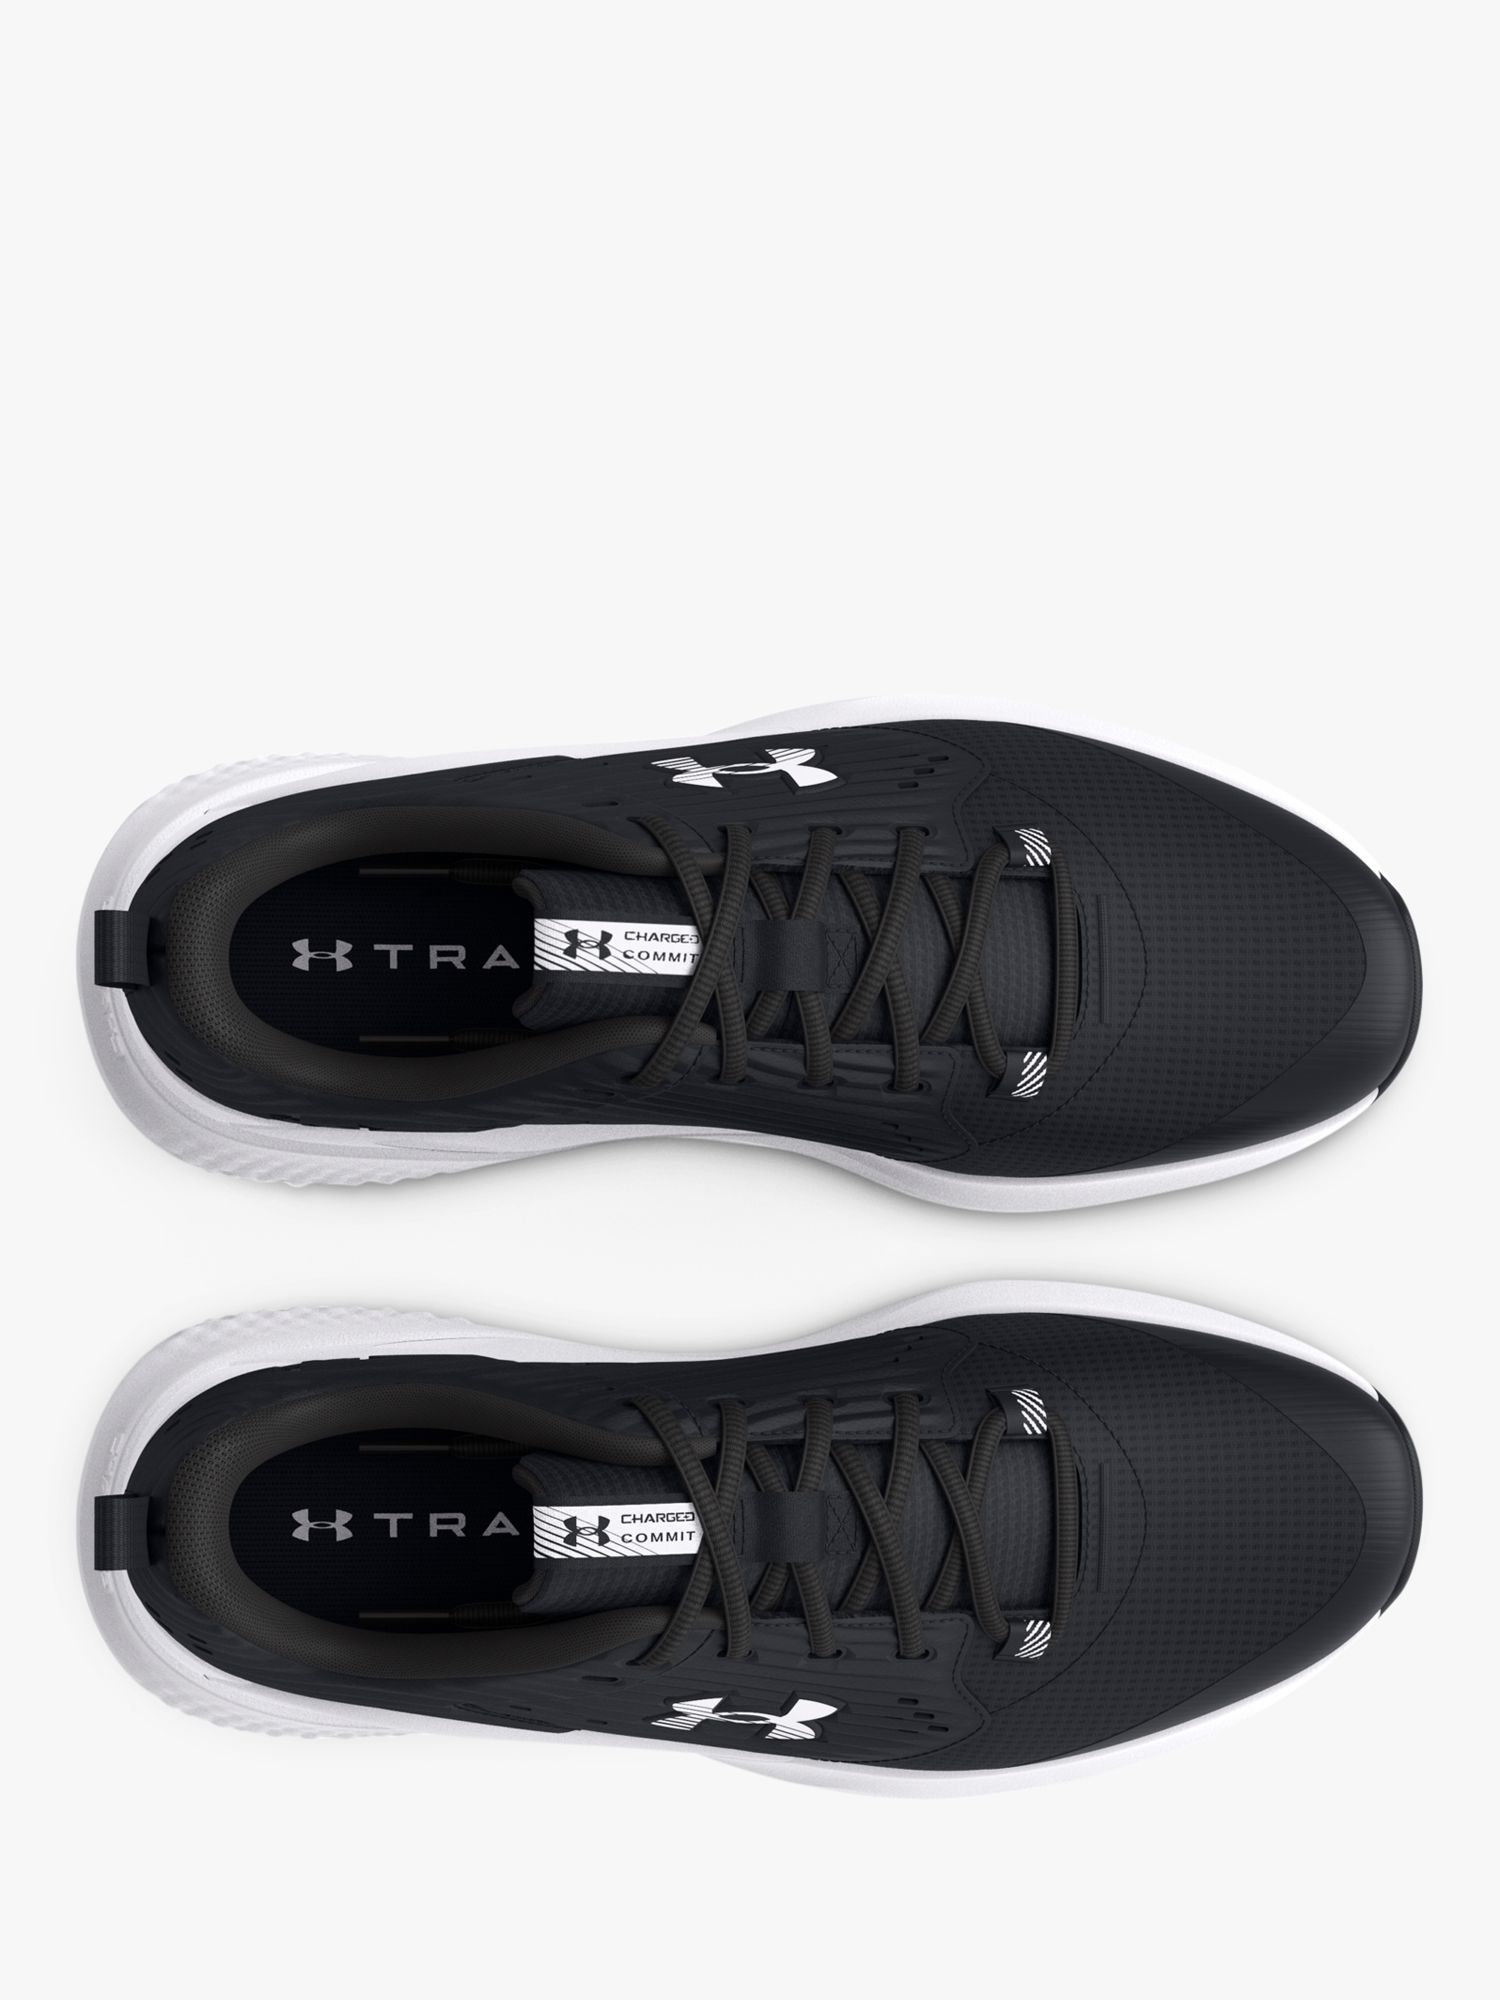 Buy Under Armour Charged Men's Running Shoes, Black/White Online at johnlewis.com